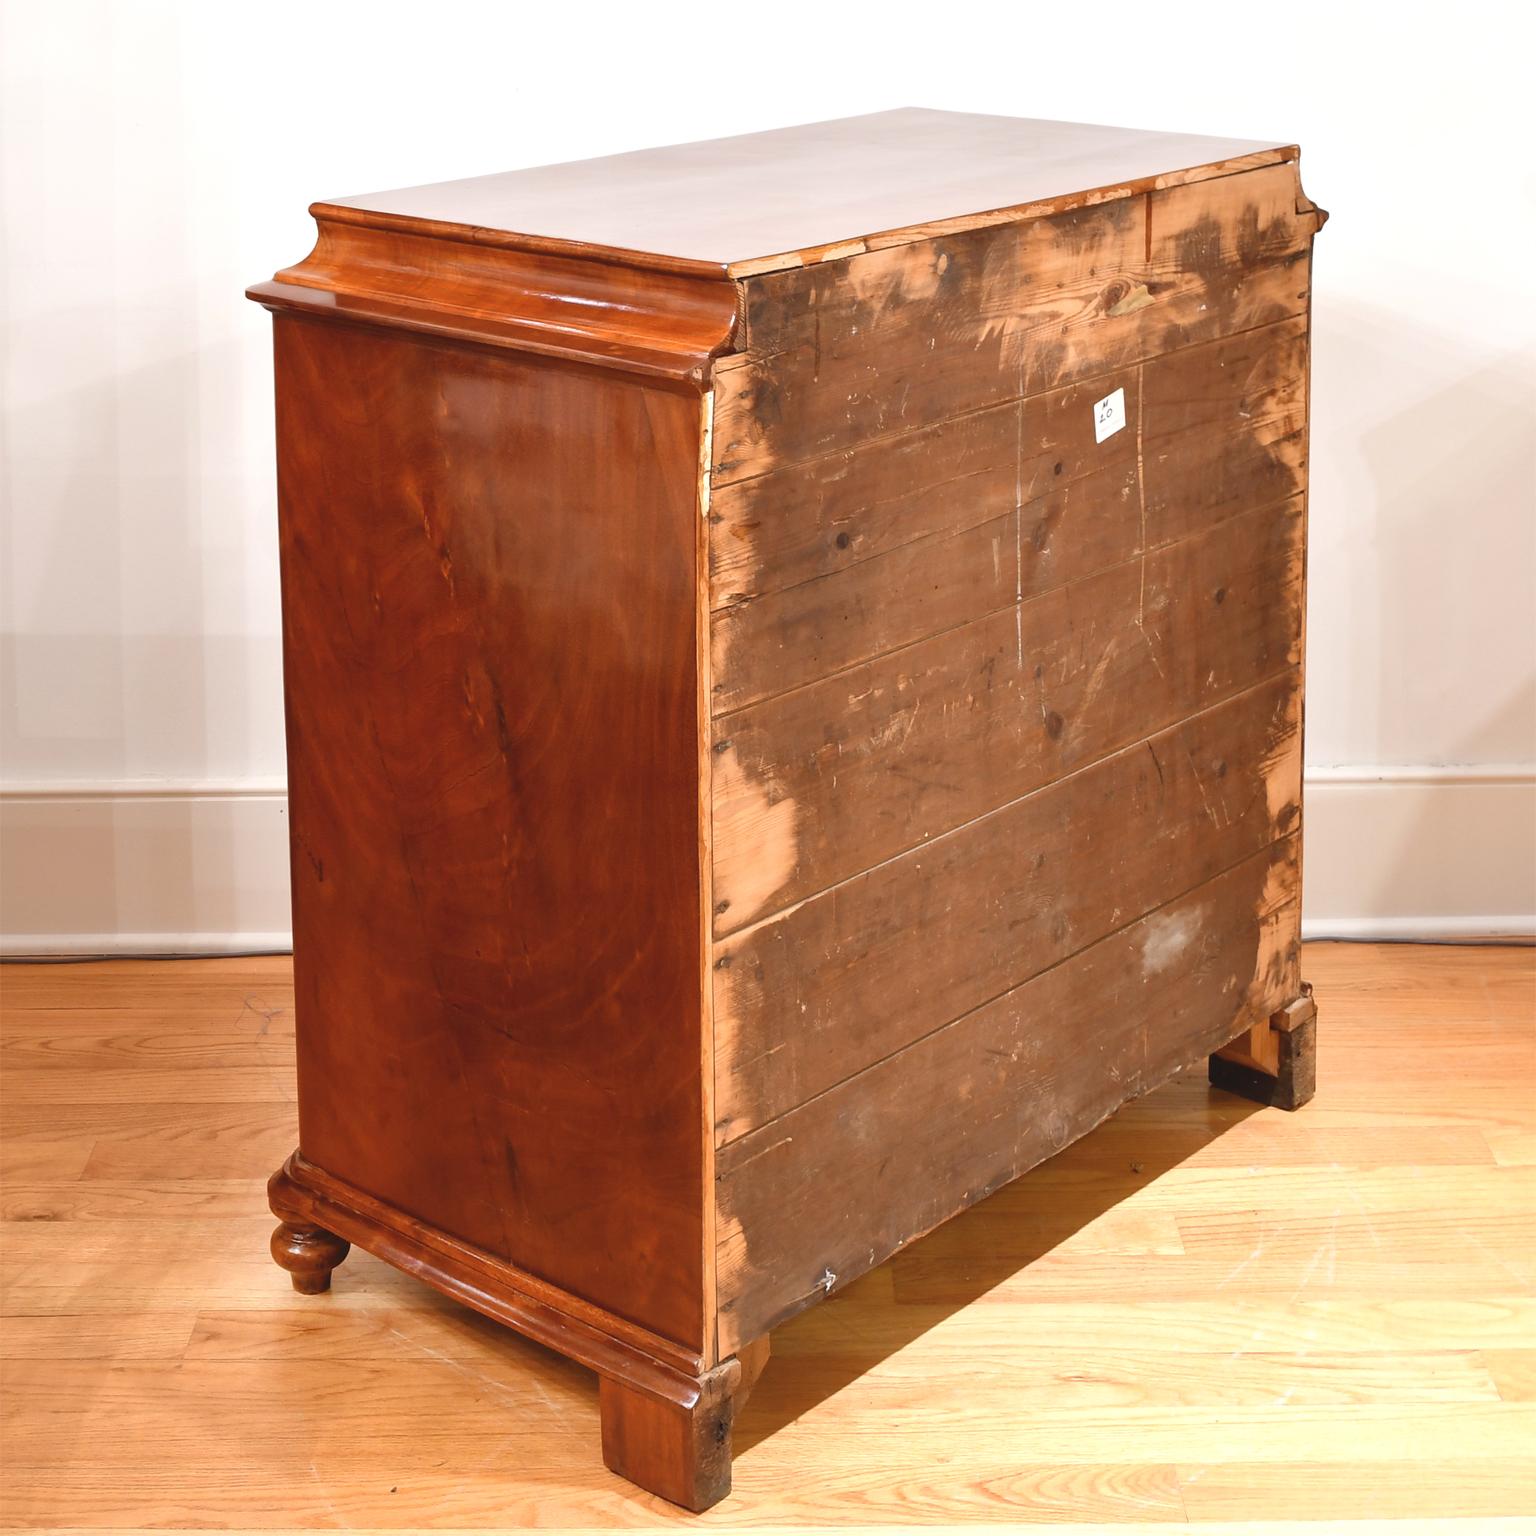 Mid-19th Century Antique Empire/ Biedermeier Chest of Drawers in West Indies Mahogany, Denmark For Sale